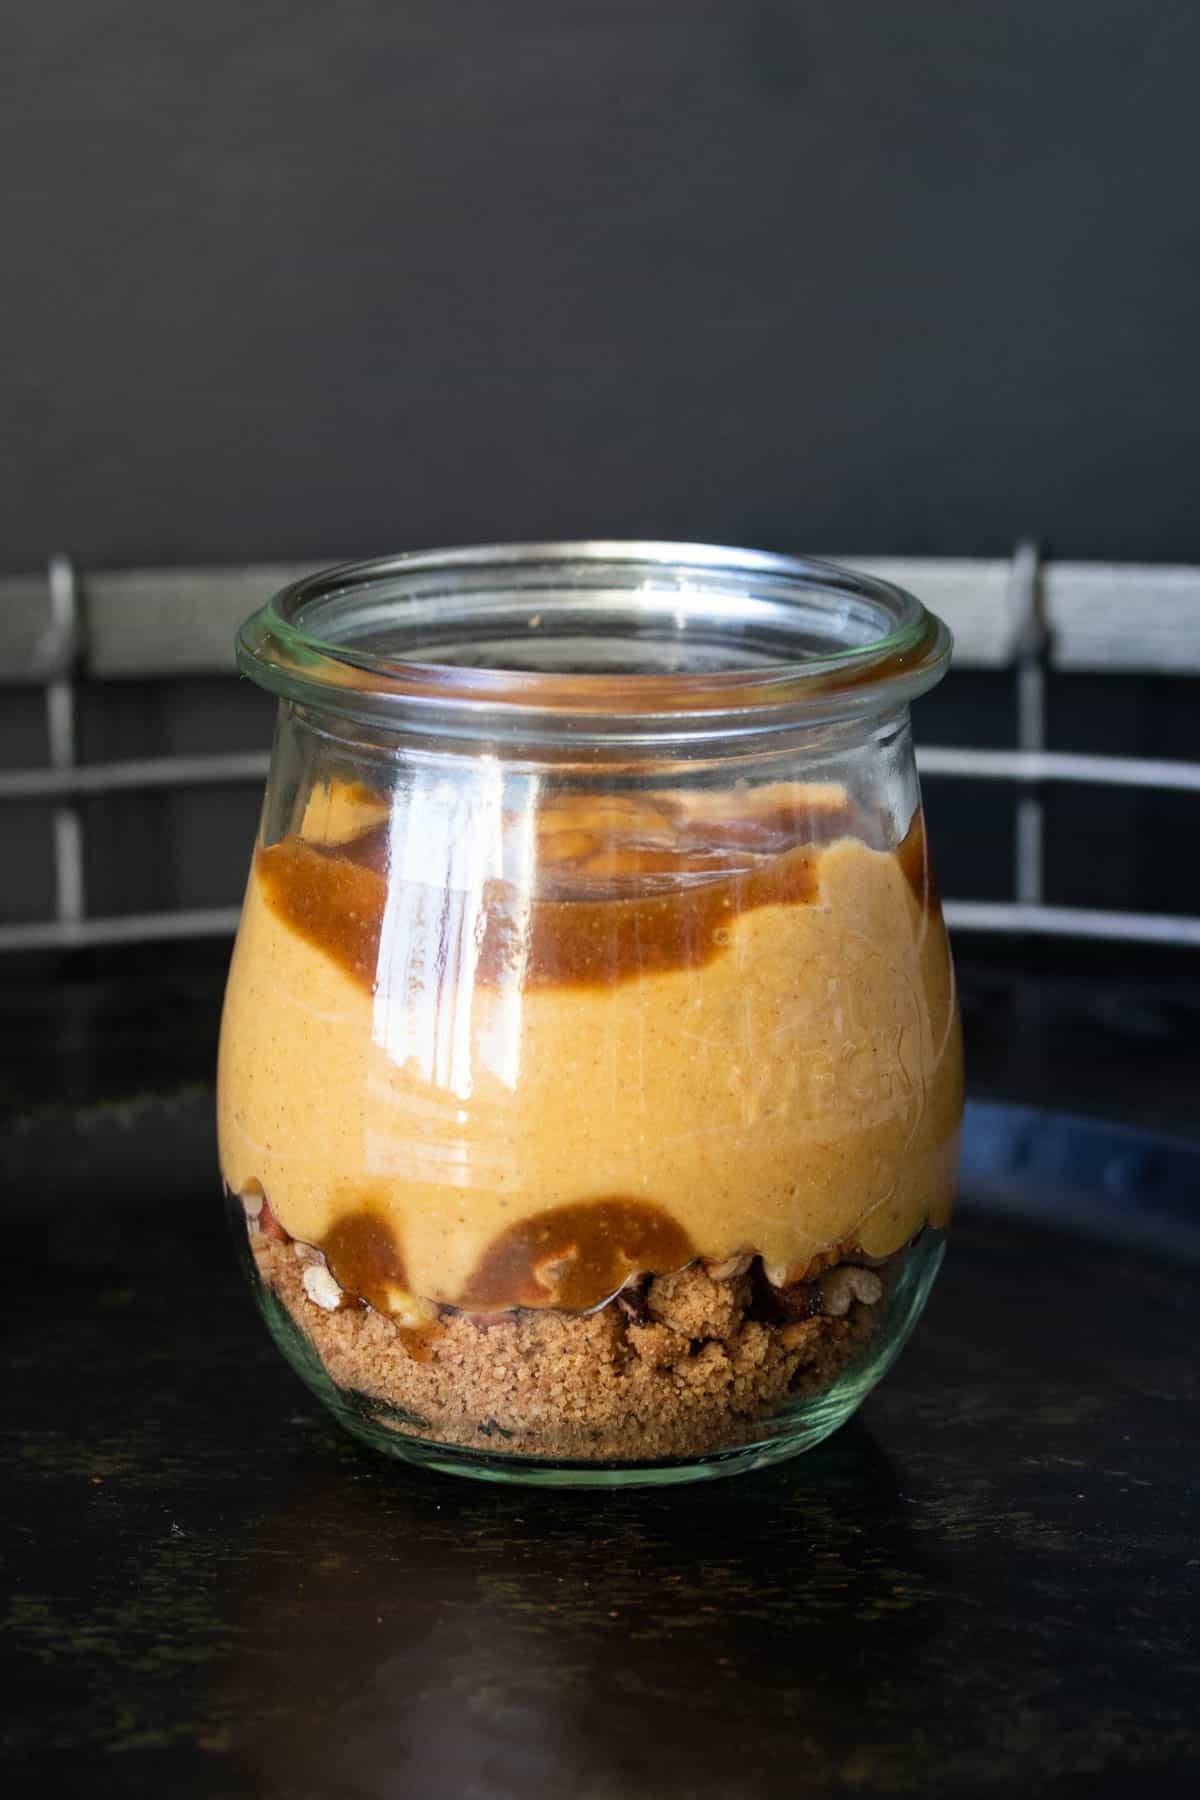 A glass jar layered with crushed cookies, nuts, caramel and a creamy pumpkin filling.